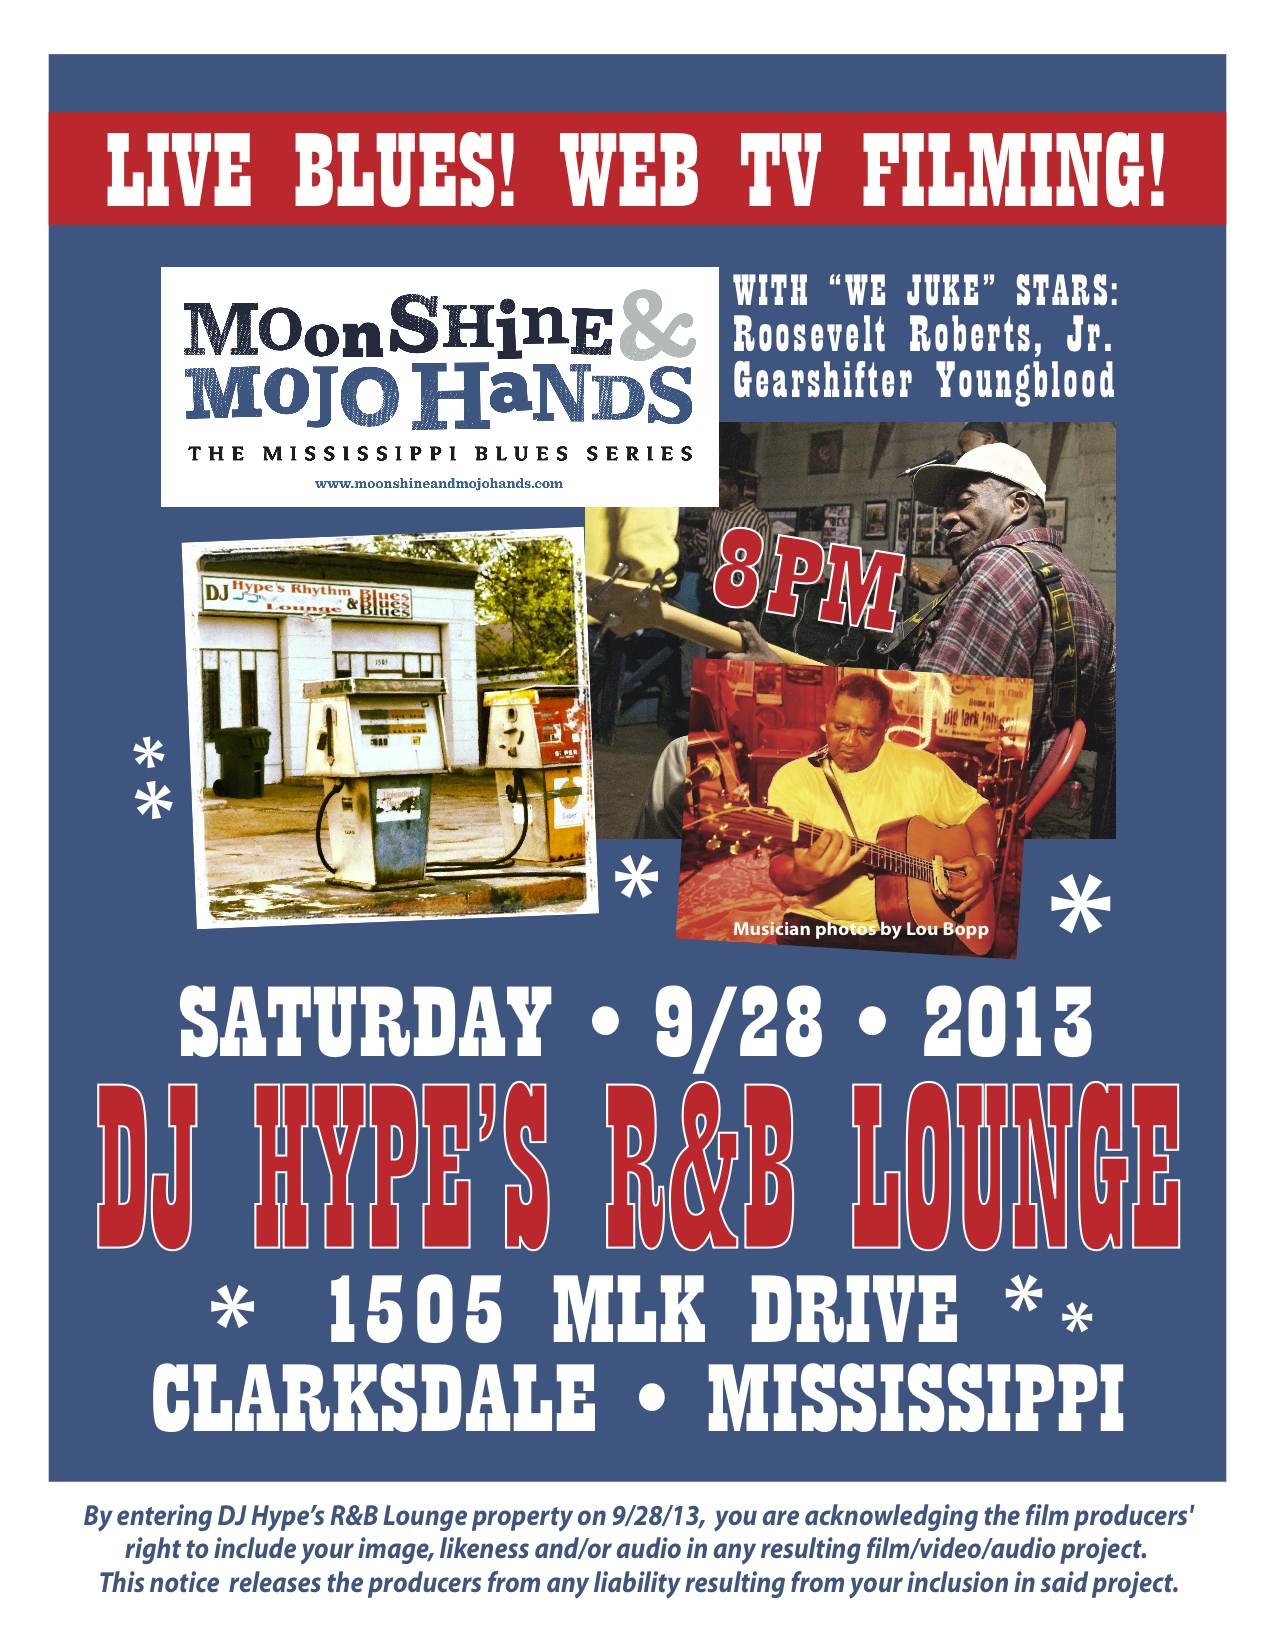 Poster for public filming event at Clarksdale, Mississippi, juke joint for 